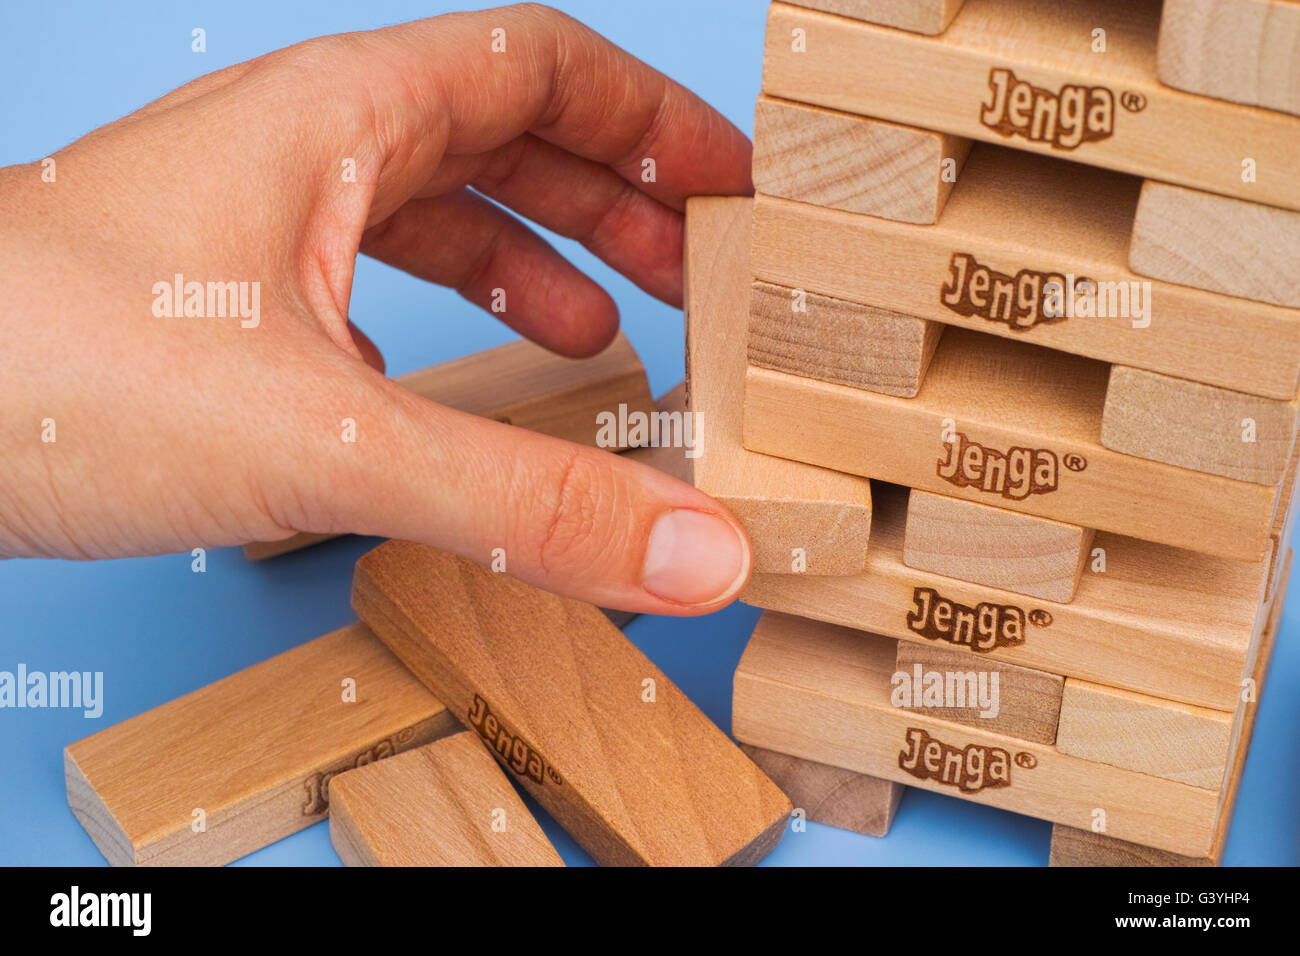 Tambov, Russian Federation - March 03, 2016 Human hand removing one block from Jenga tower constructed on blue background. Stock Photo